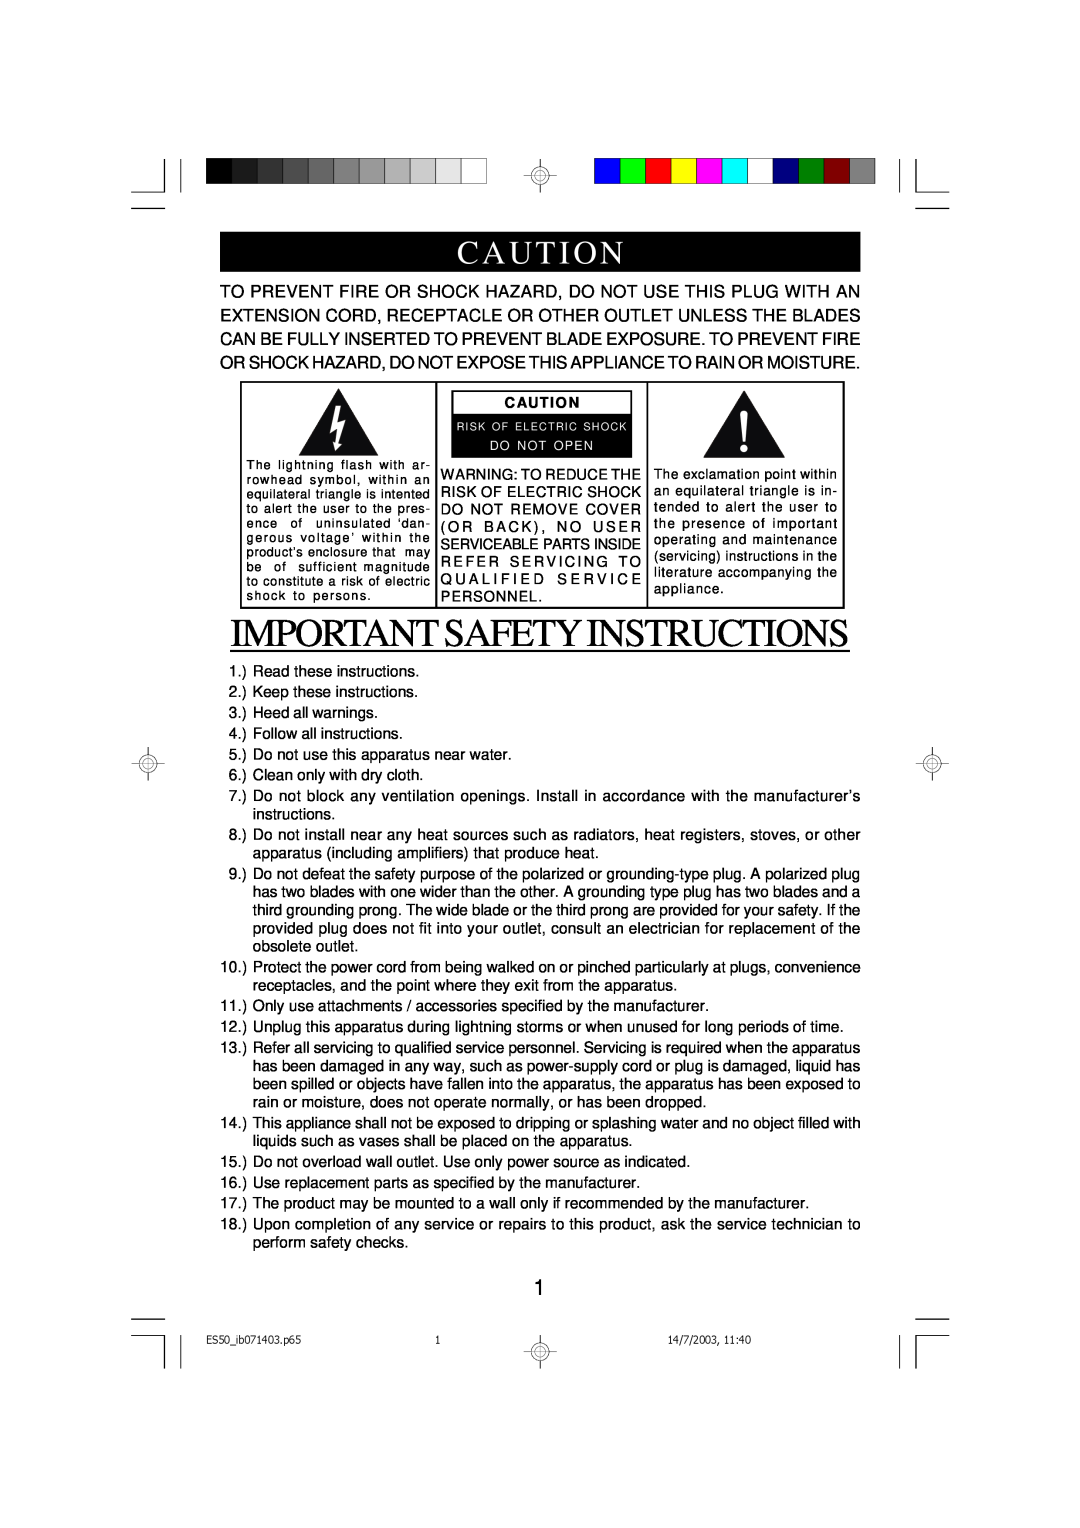 Emerson ES50 owner manual Important Safety Instructions, Caut I On 